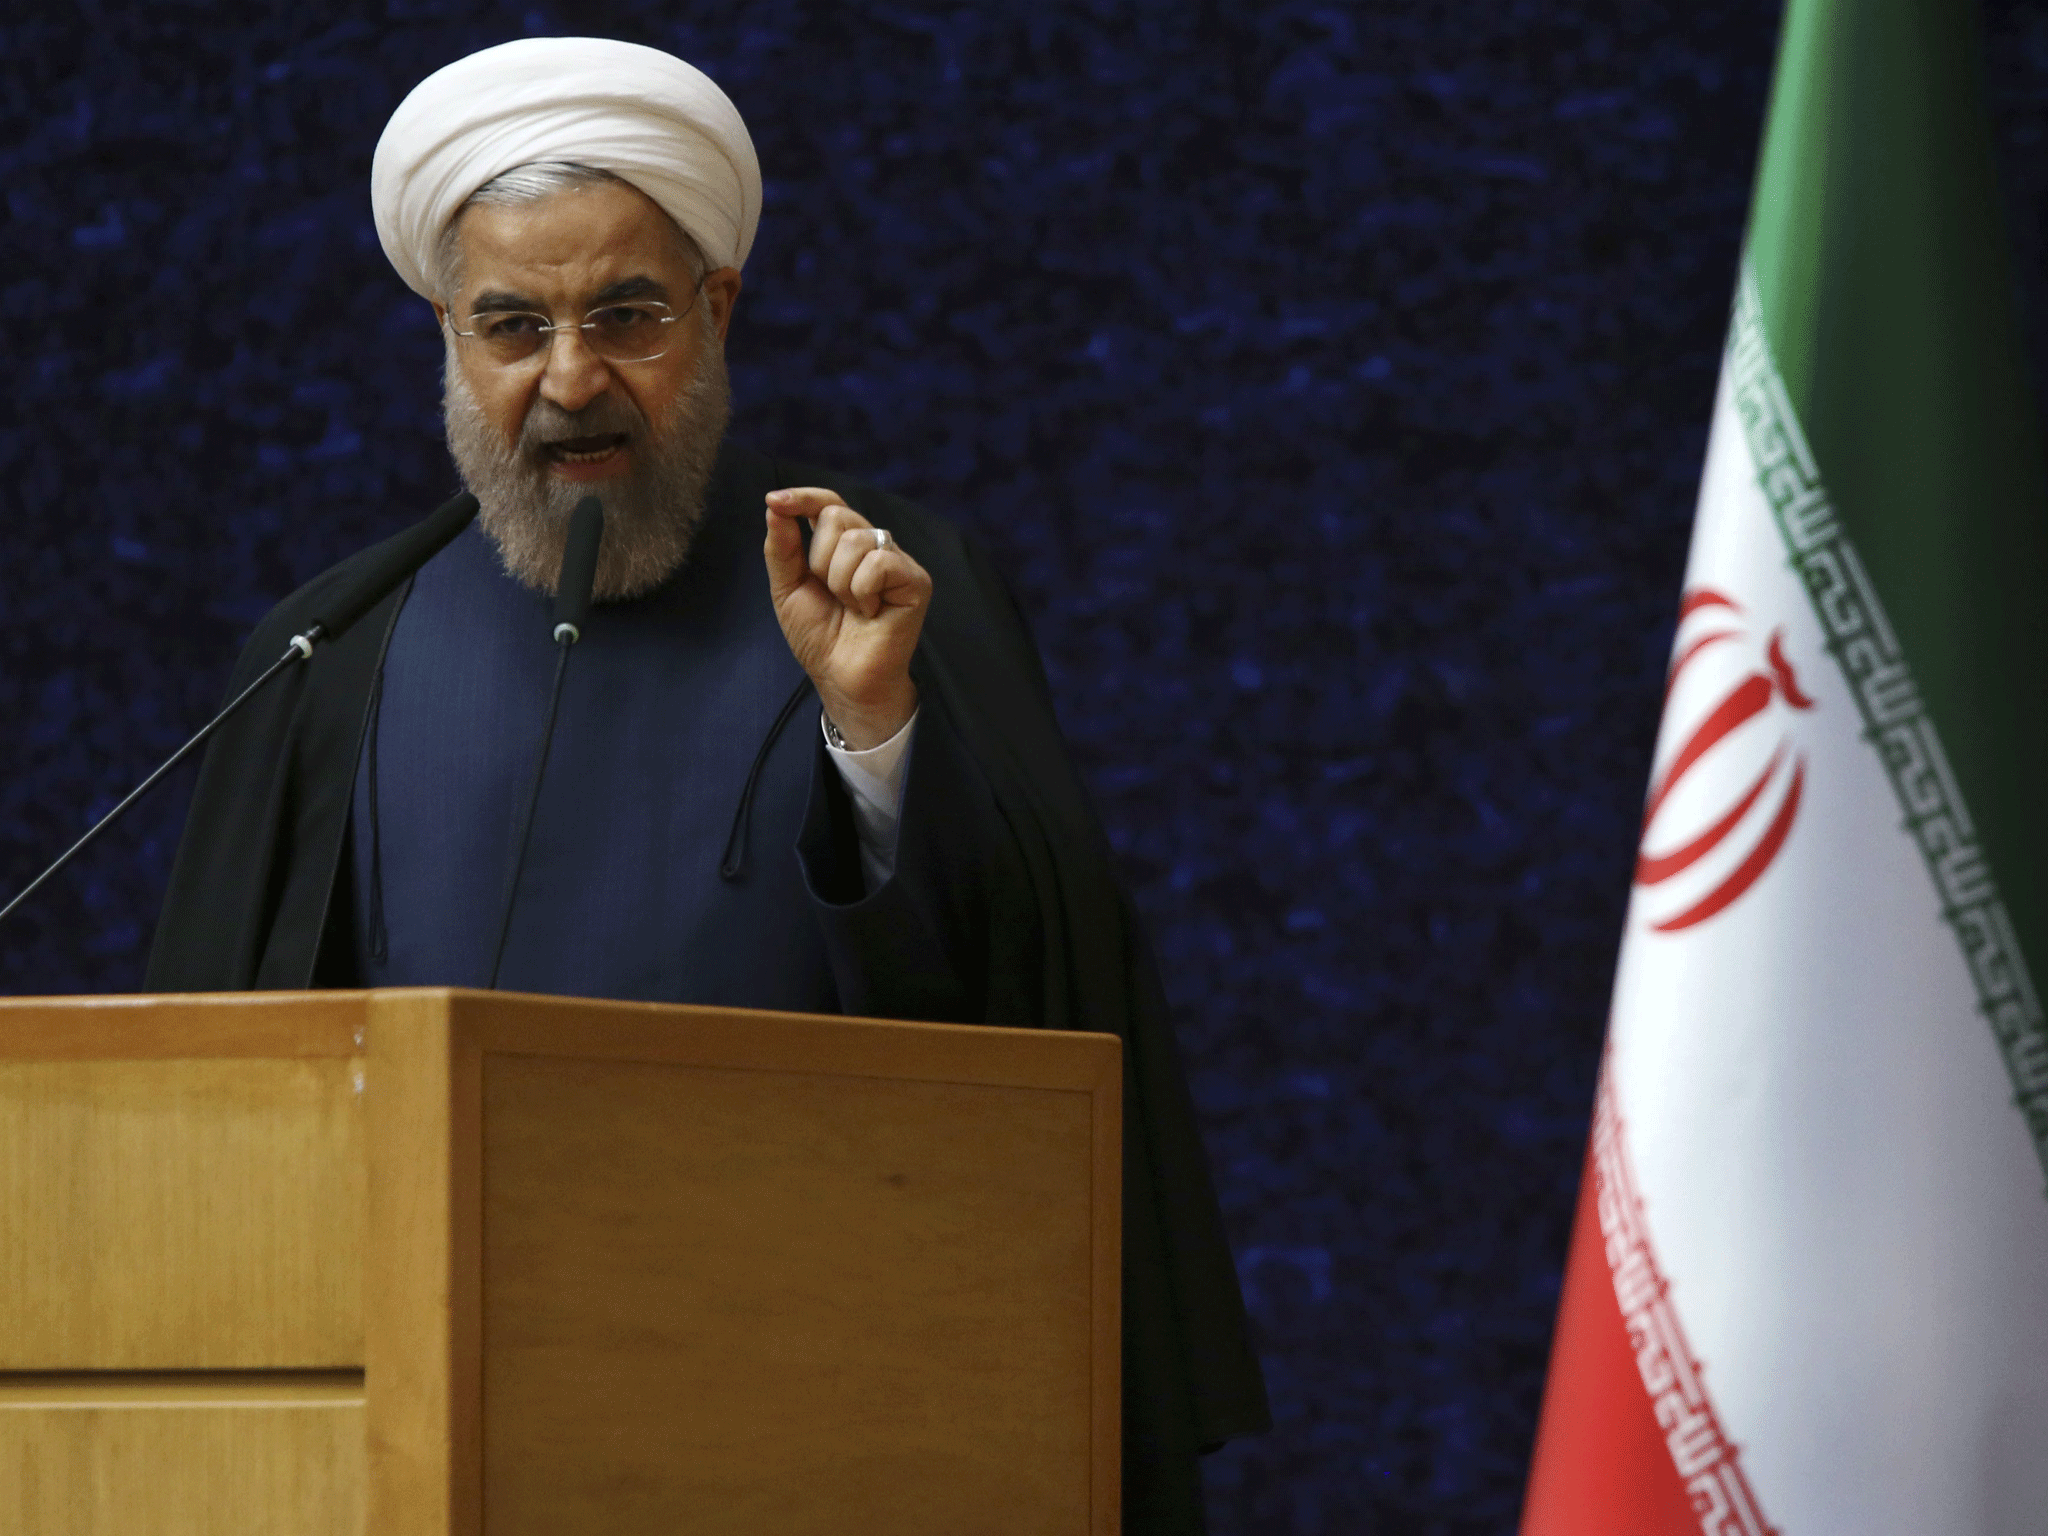 Nobody can meddle in independent Iran: President Rouhani